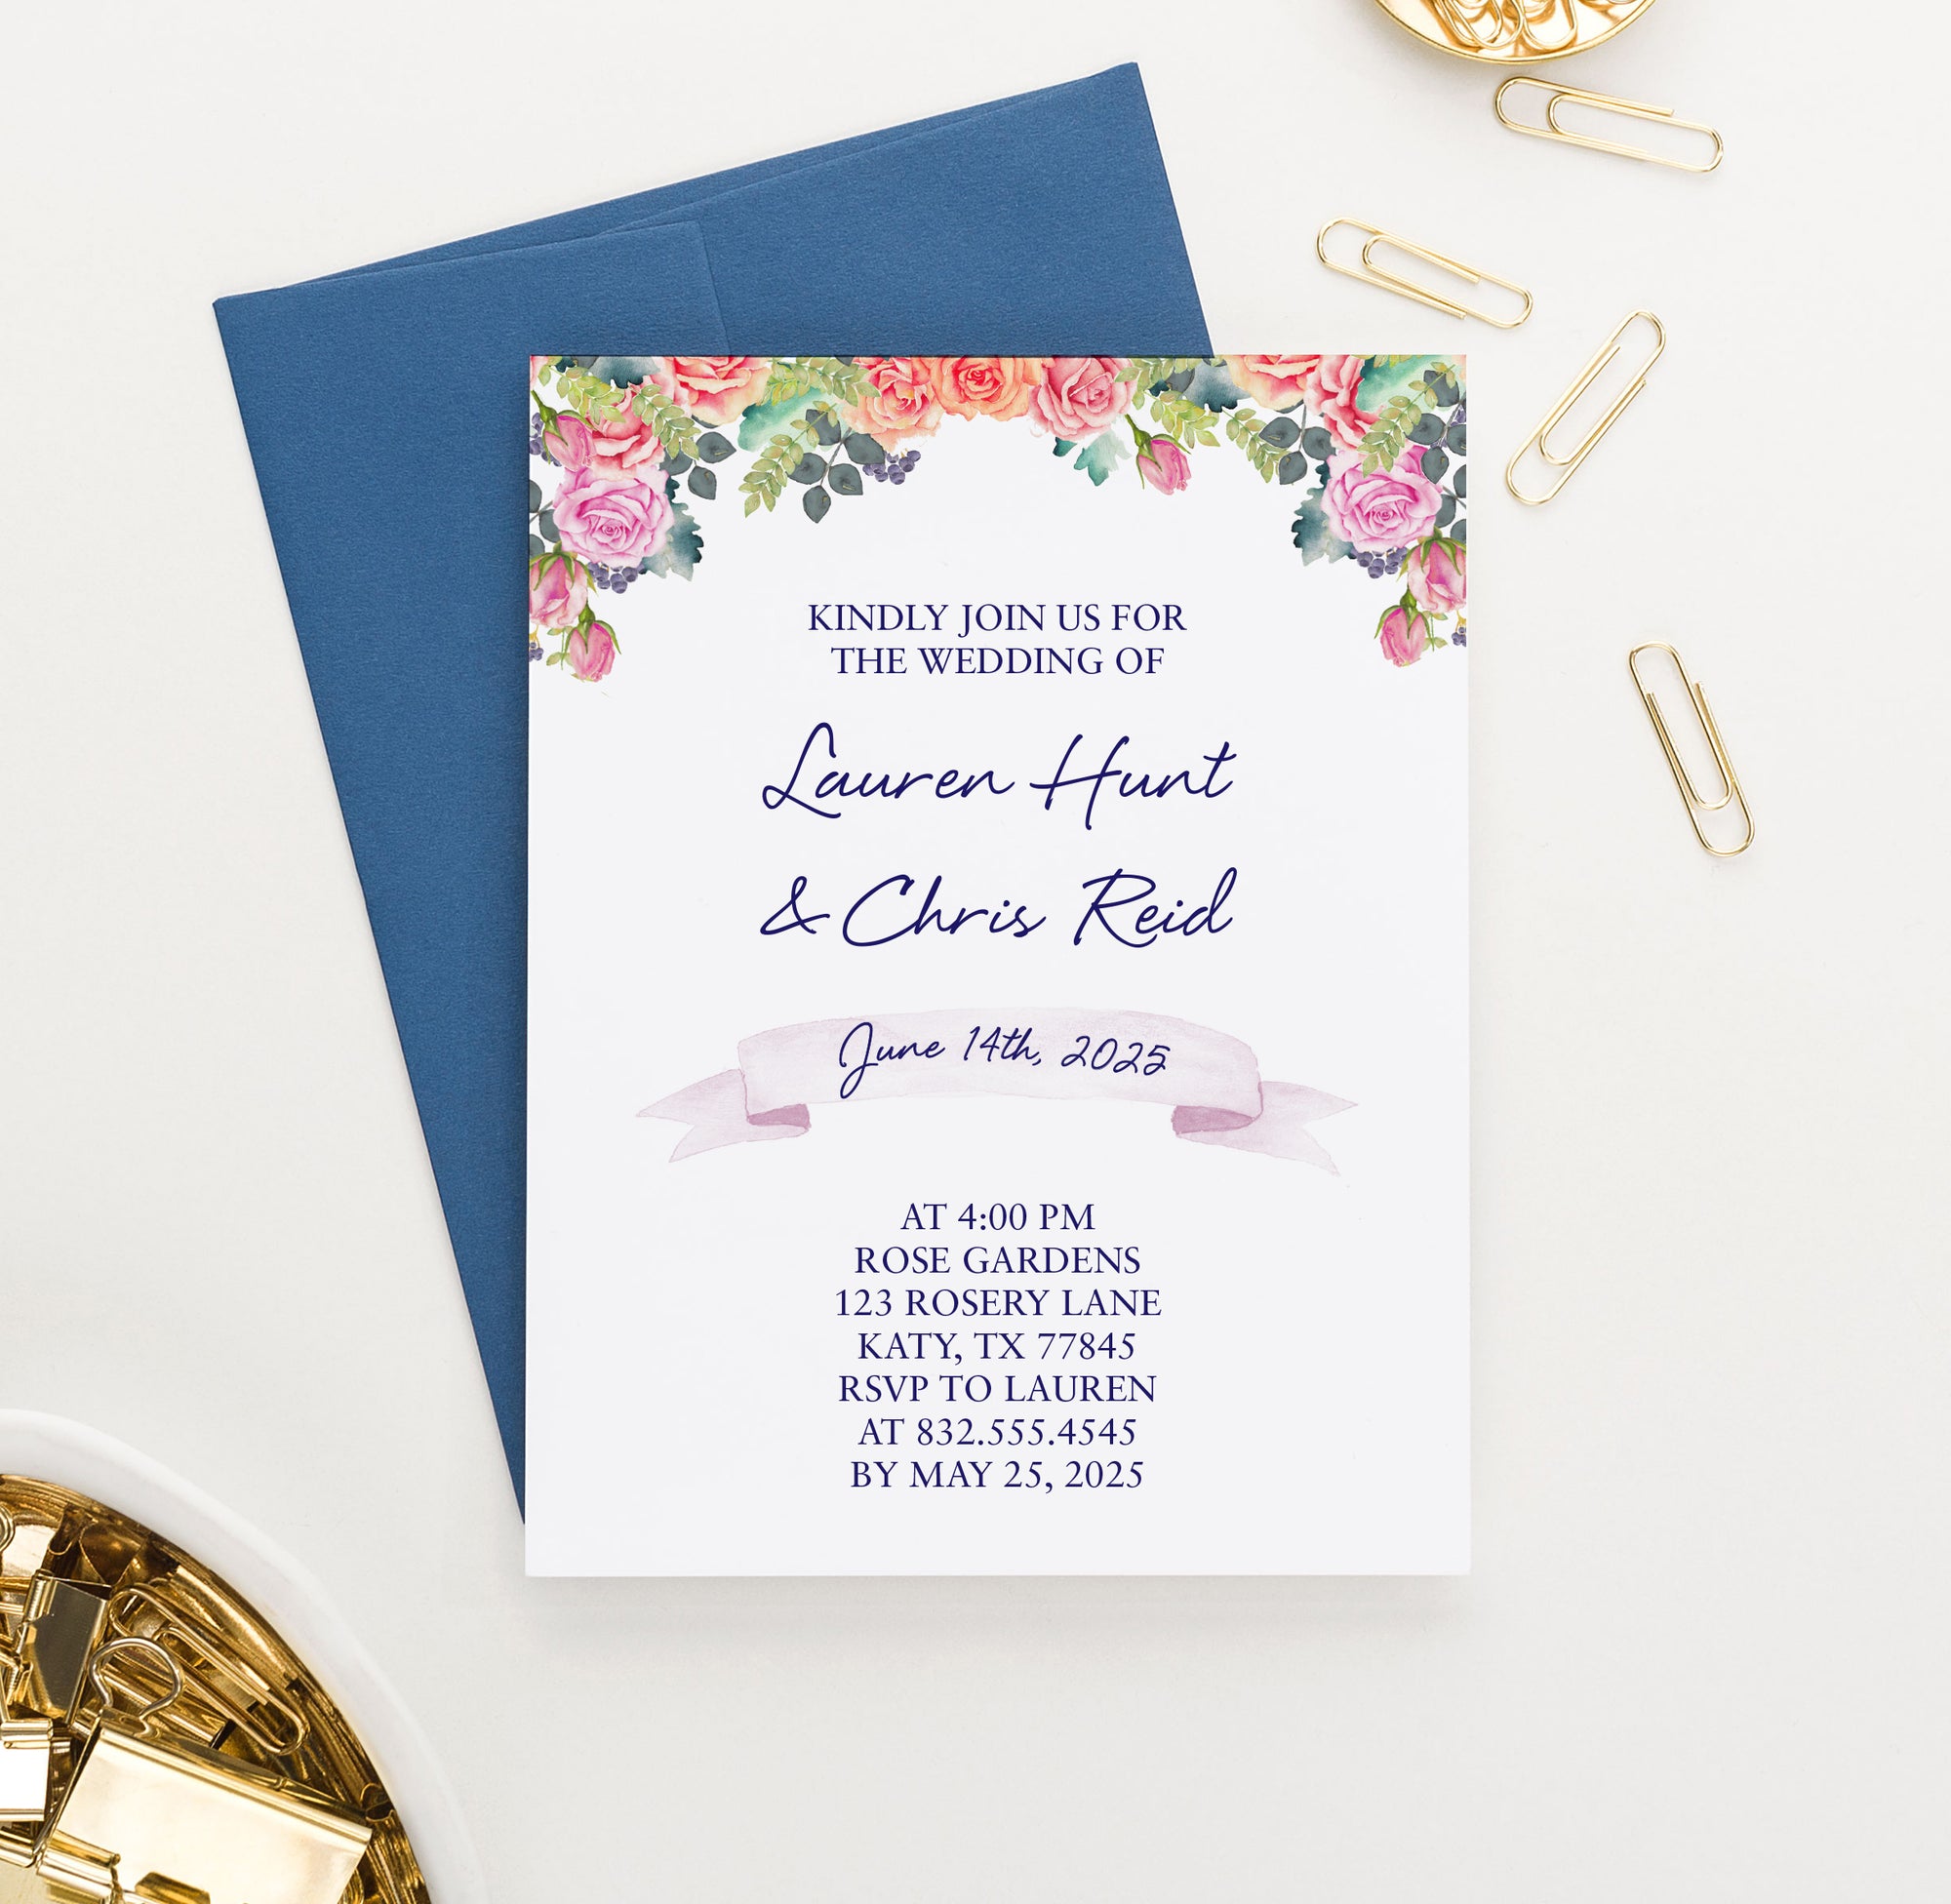 WI034 Personalized Watercolor Floral Wedding Invites Elegant water color elegant modern invitations marriage